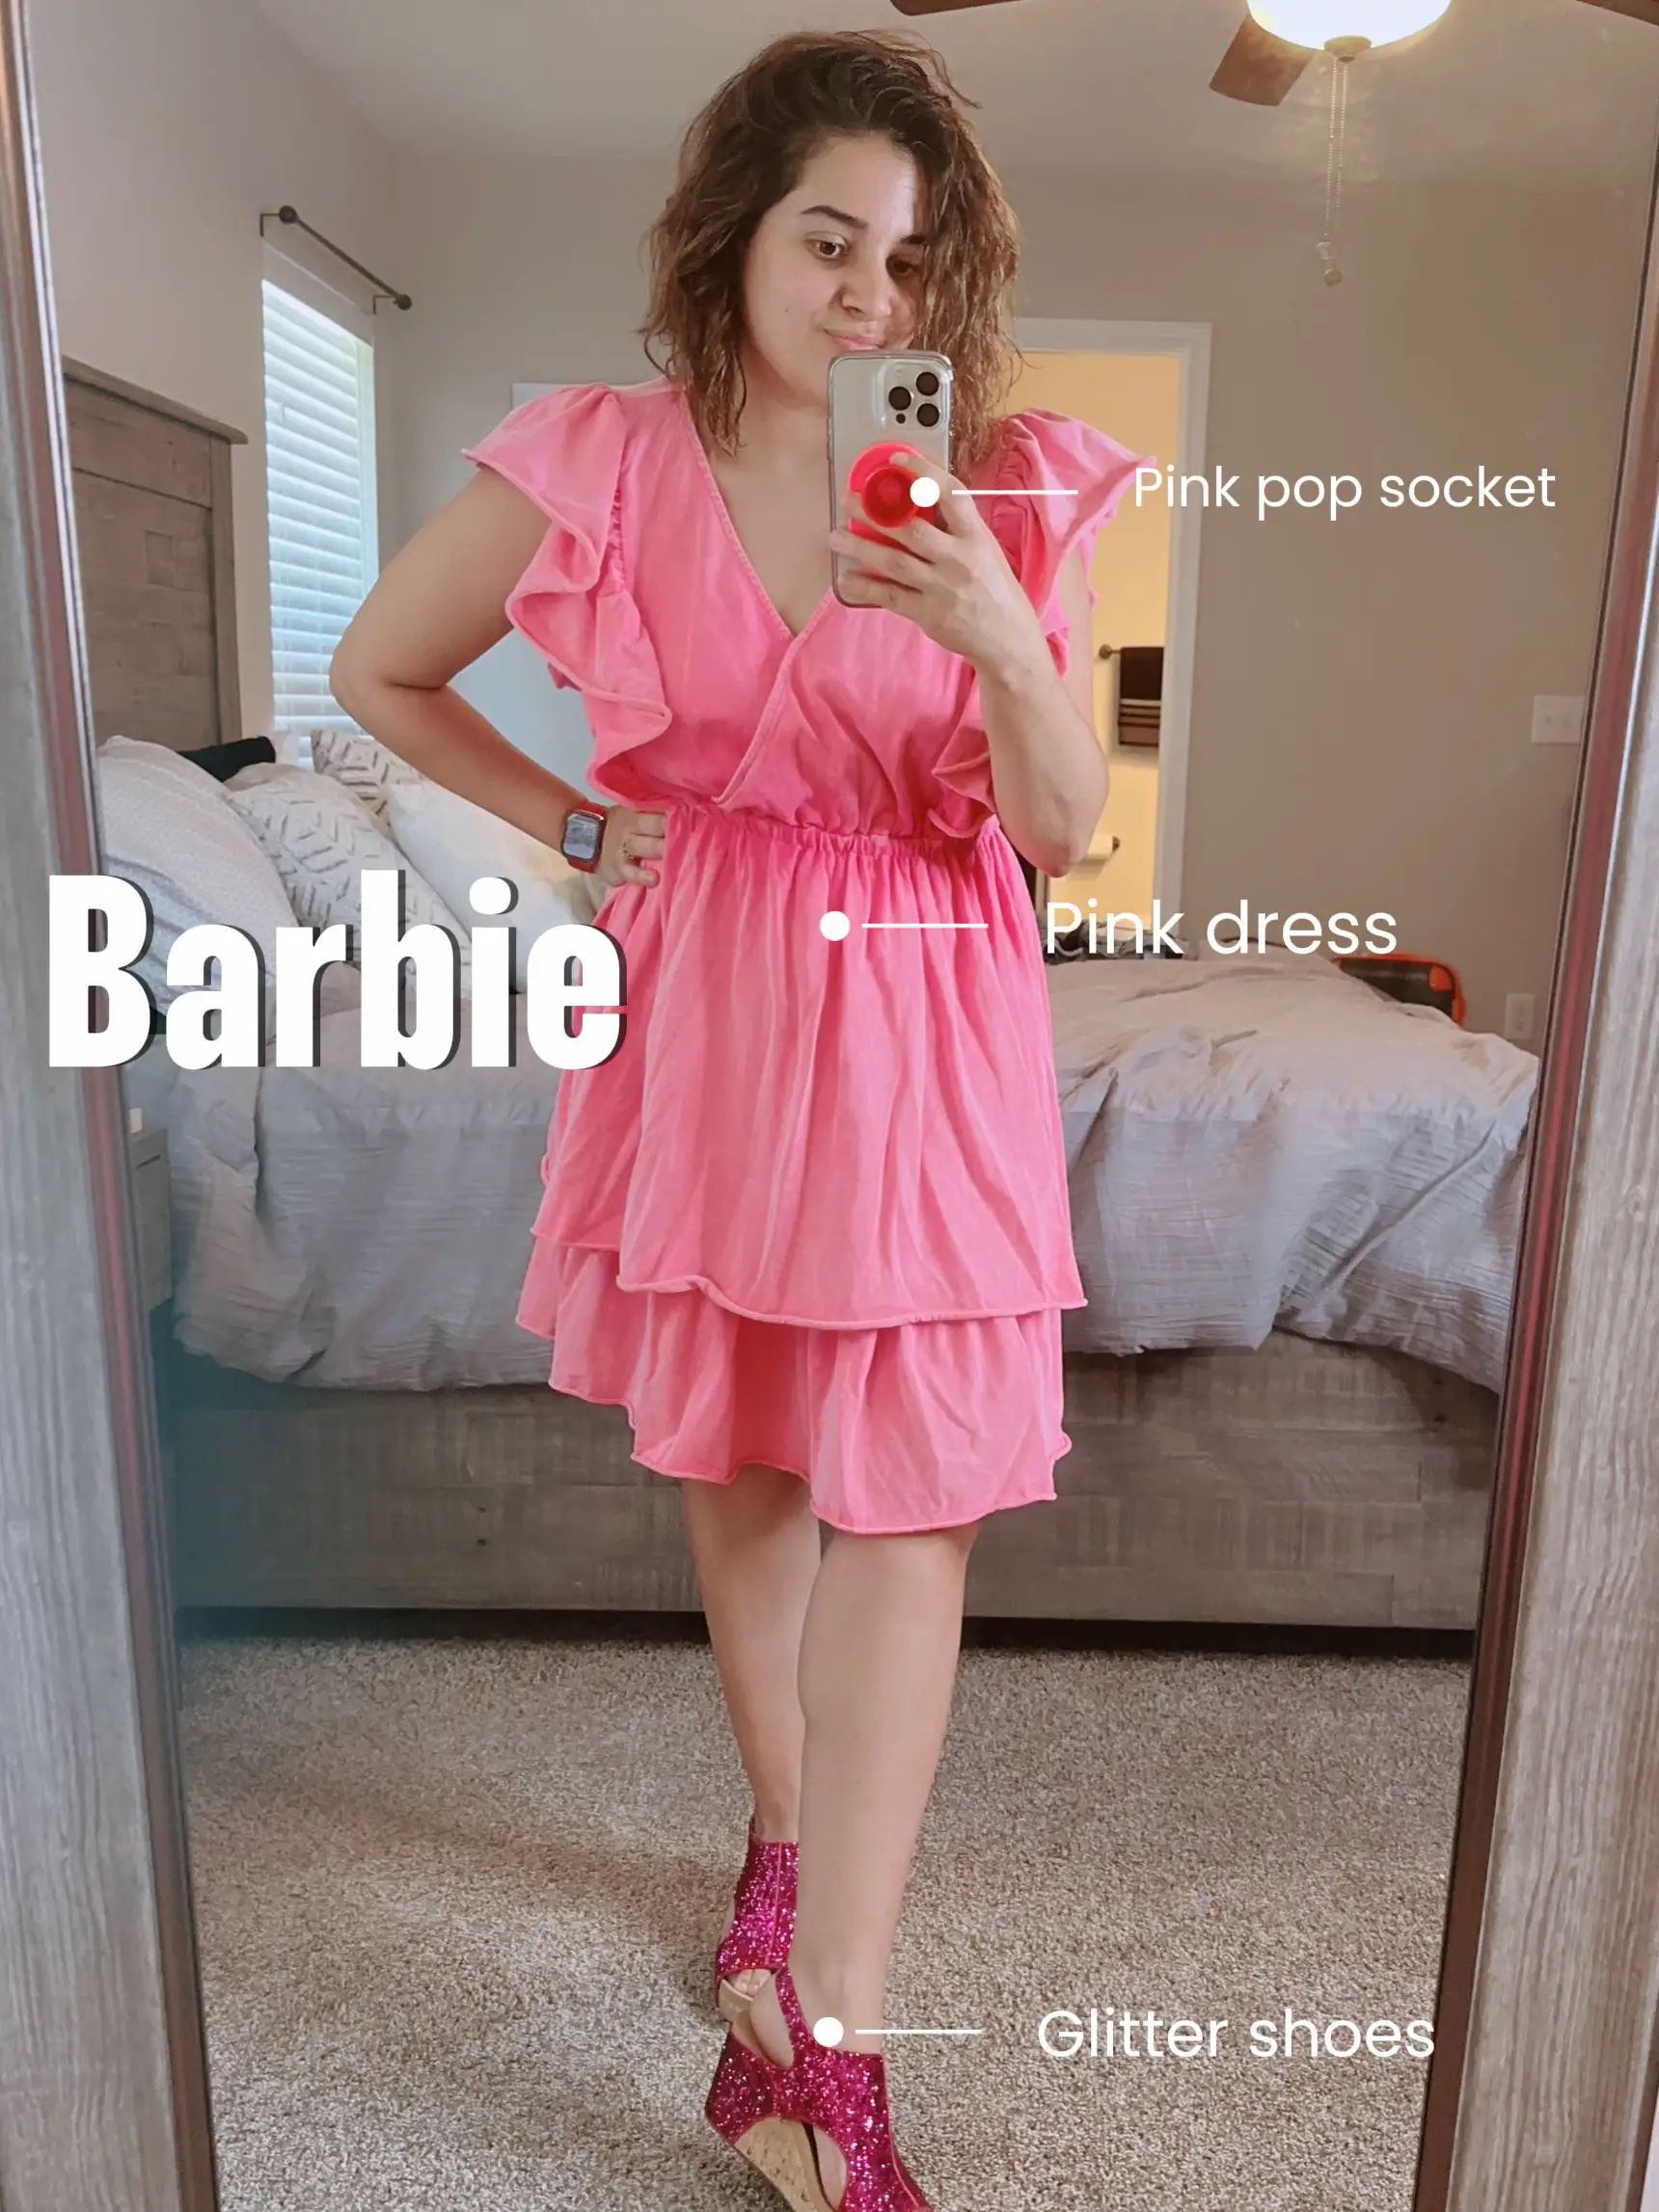 BARBIE VIBES, Gallery posted by haleycooper